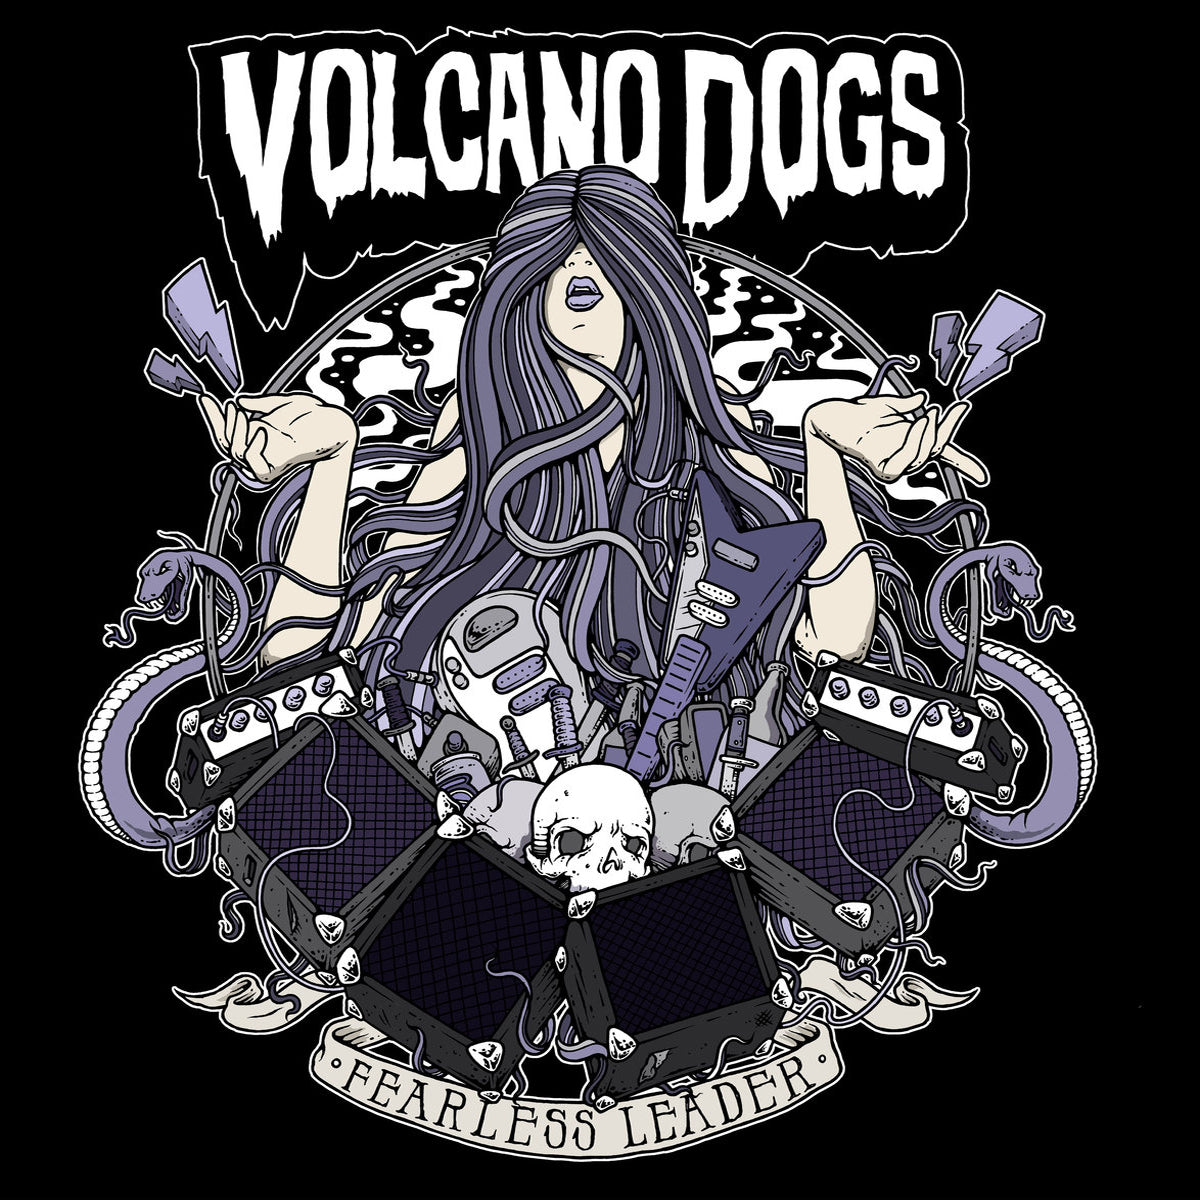 Volcano Dogs- Fearless Leader LP ~HELLACOPTERS!